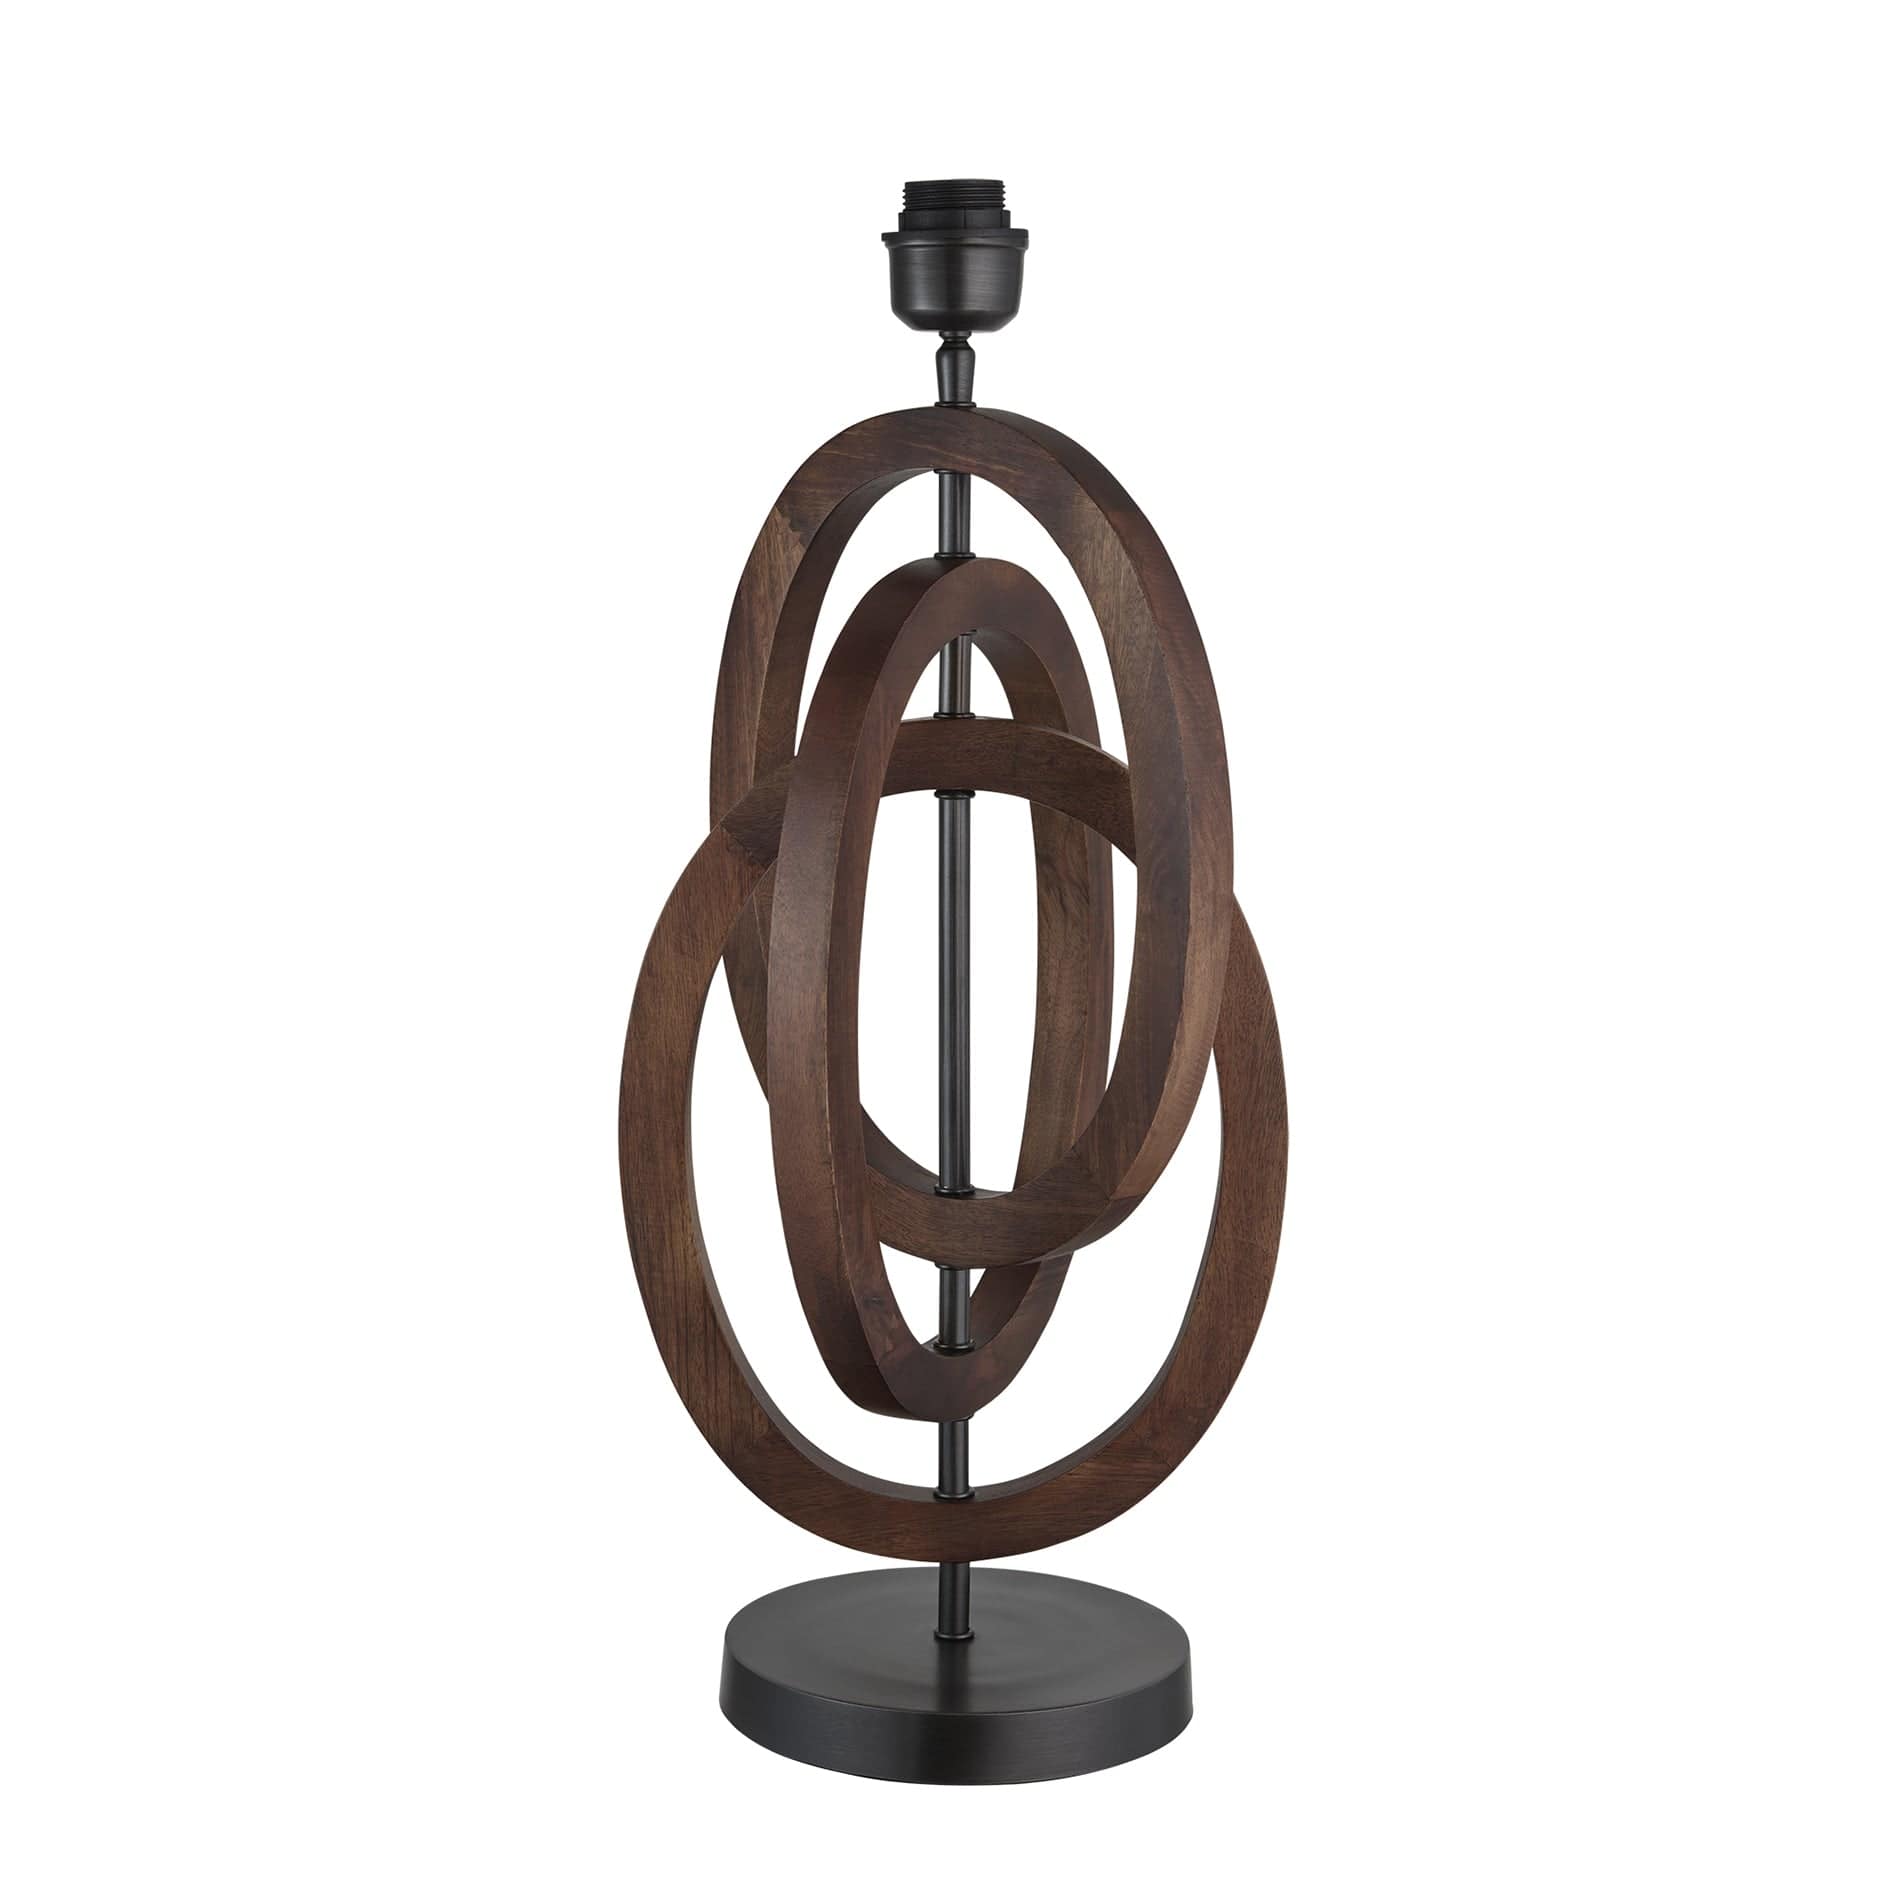 Wooden Geometric Circle Table Lamp - Walnut - Base Only Industville WO-GE-CITL-WN-BO